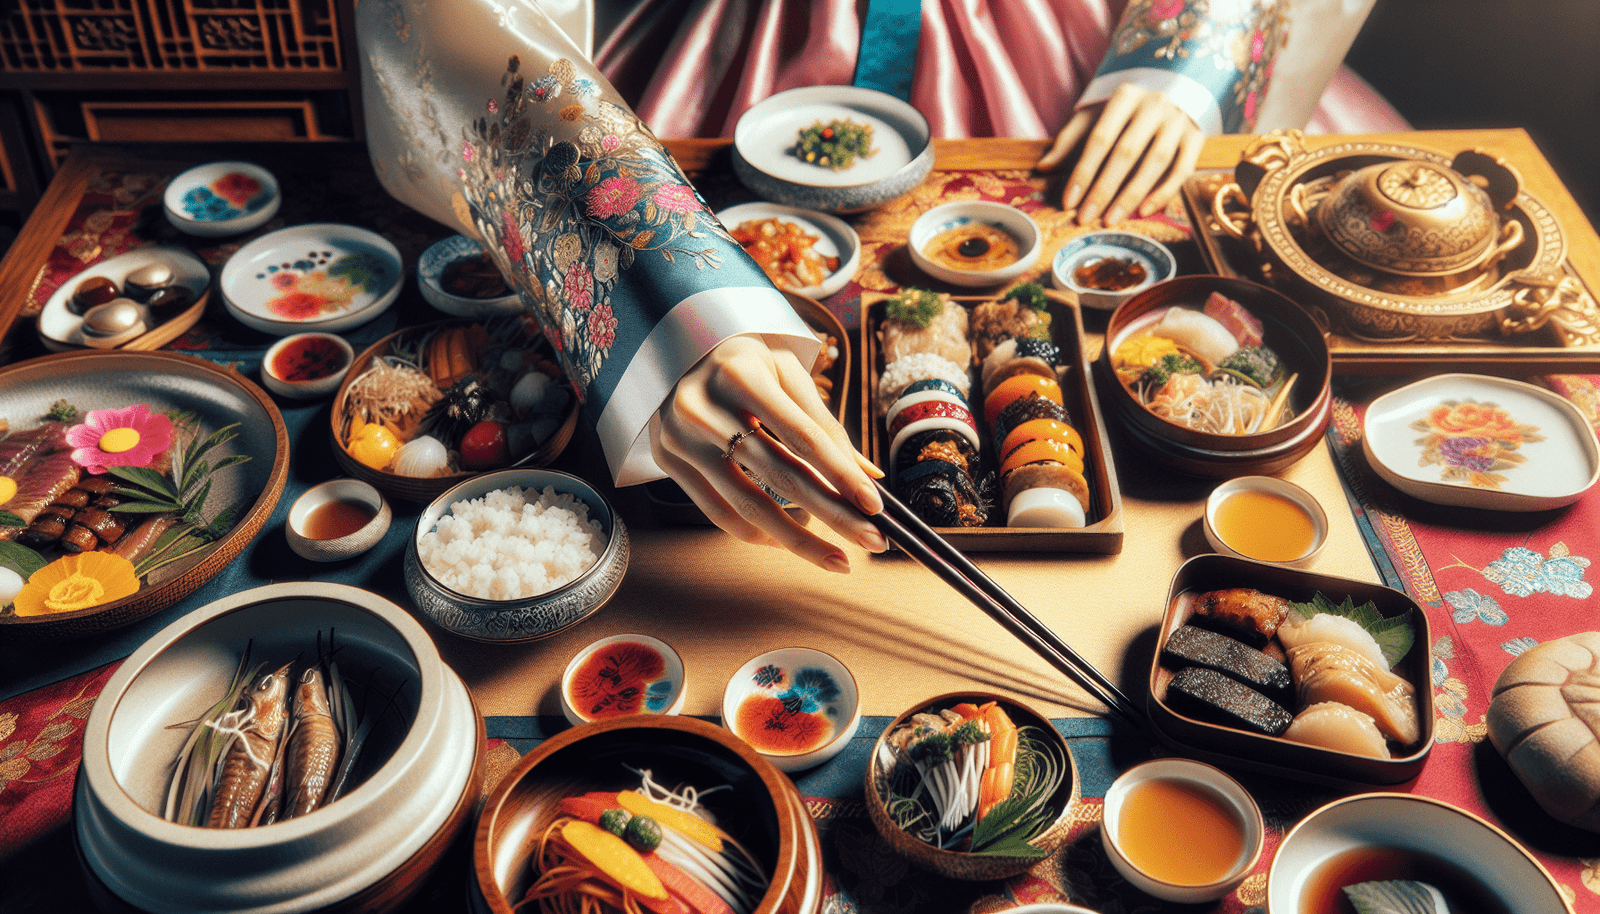 Can You Explain The Cultural Significance Of Traditional Korean Holiday Dishes?